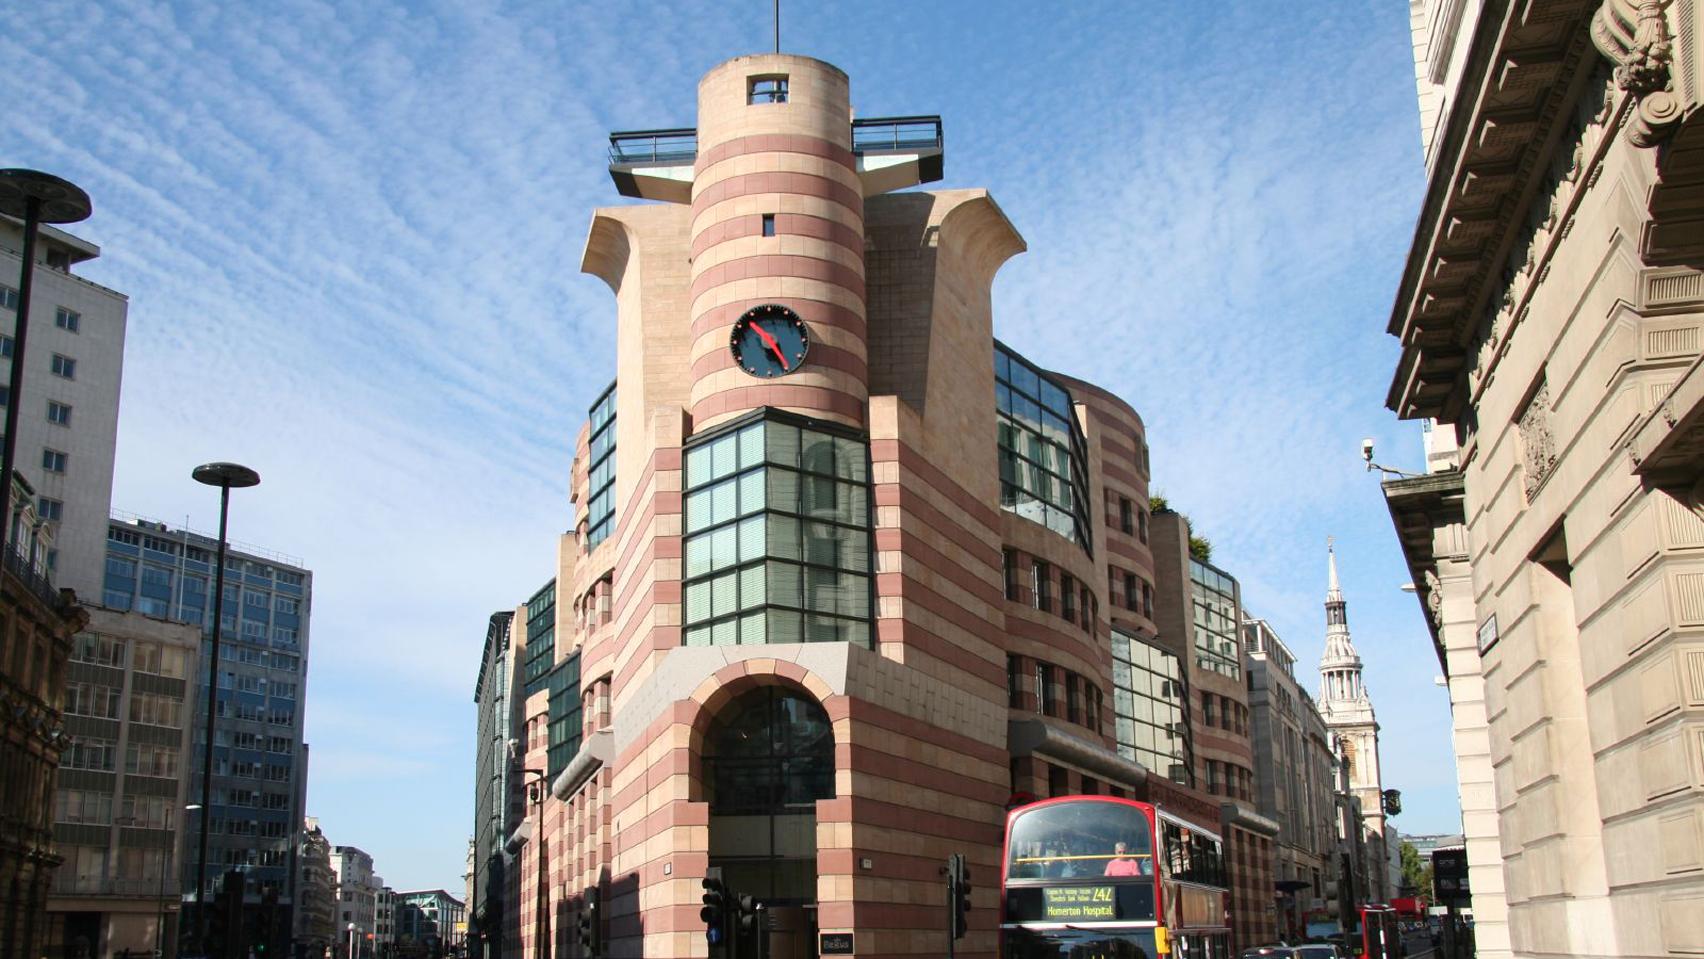 James Stirling's postmodernist No 1 Poultry granted listed status - Dezeen